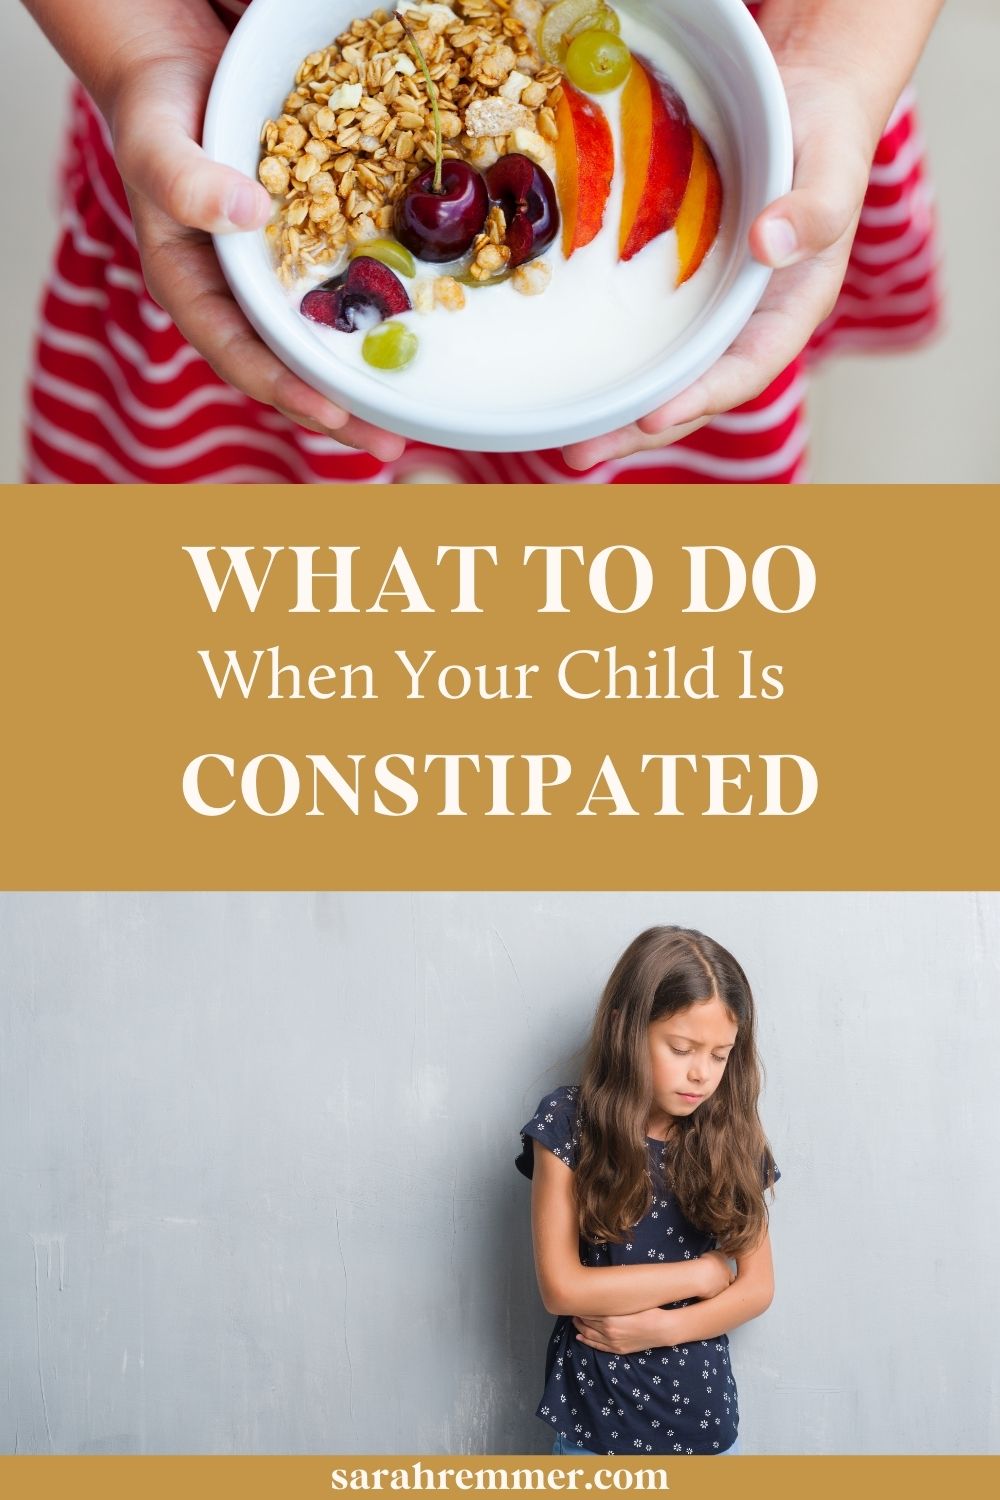 What to do When Your Child is Constipated